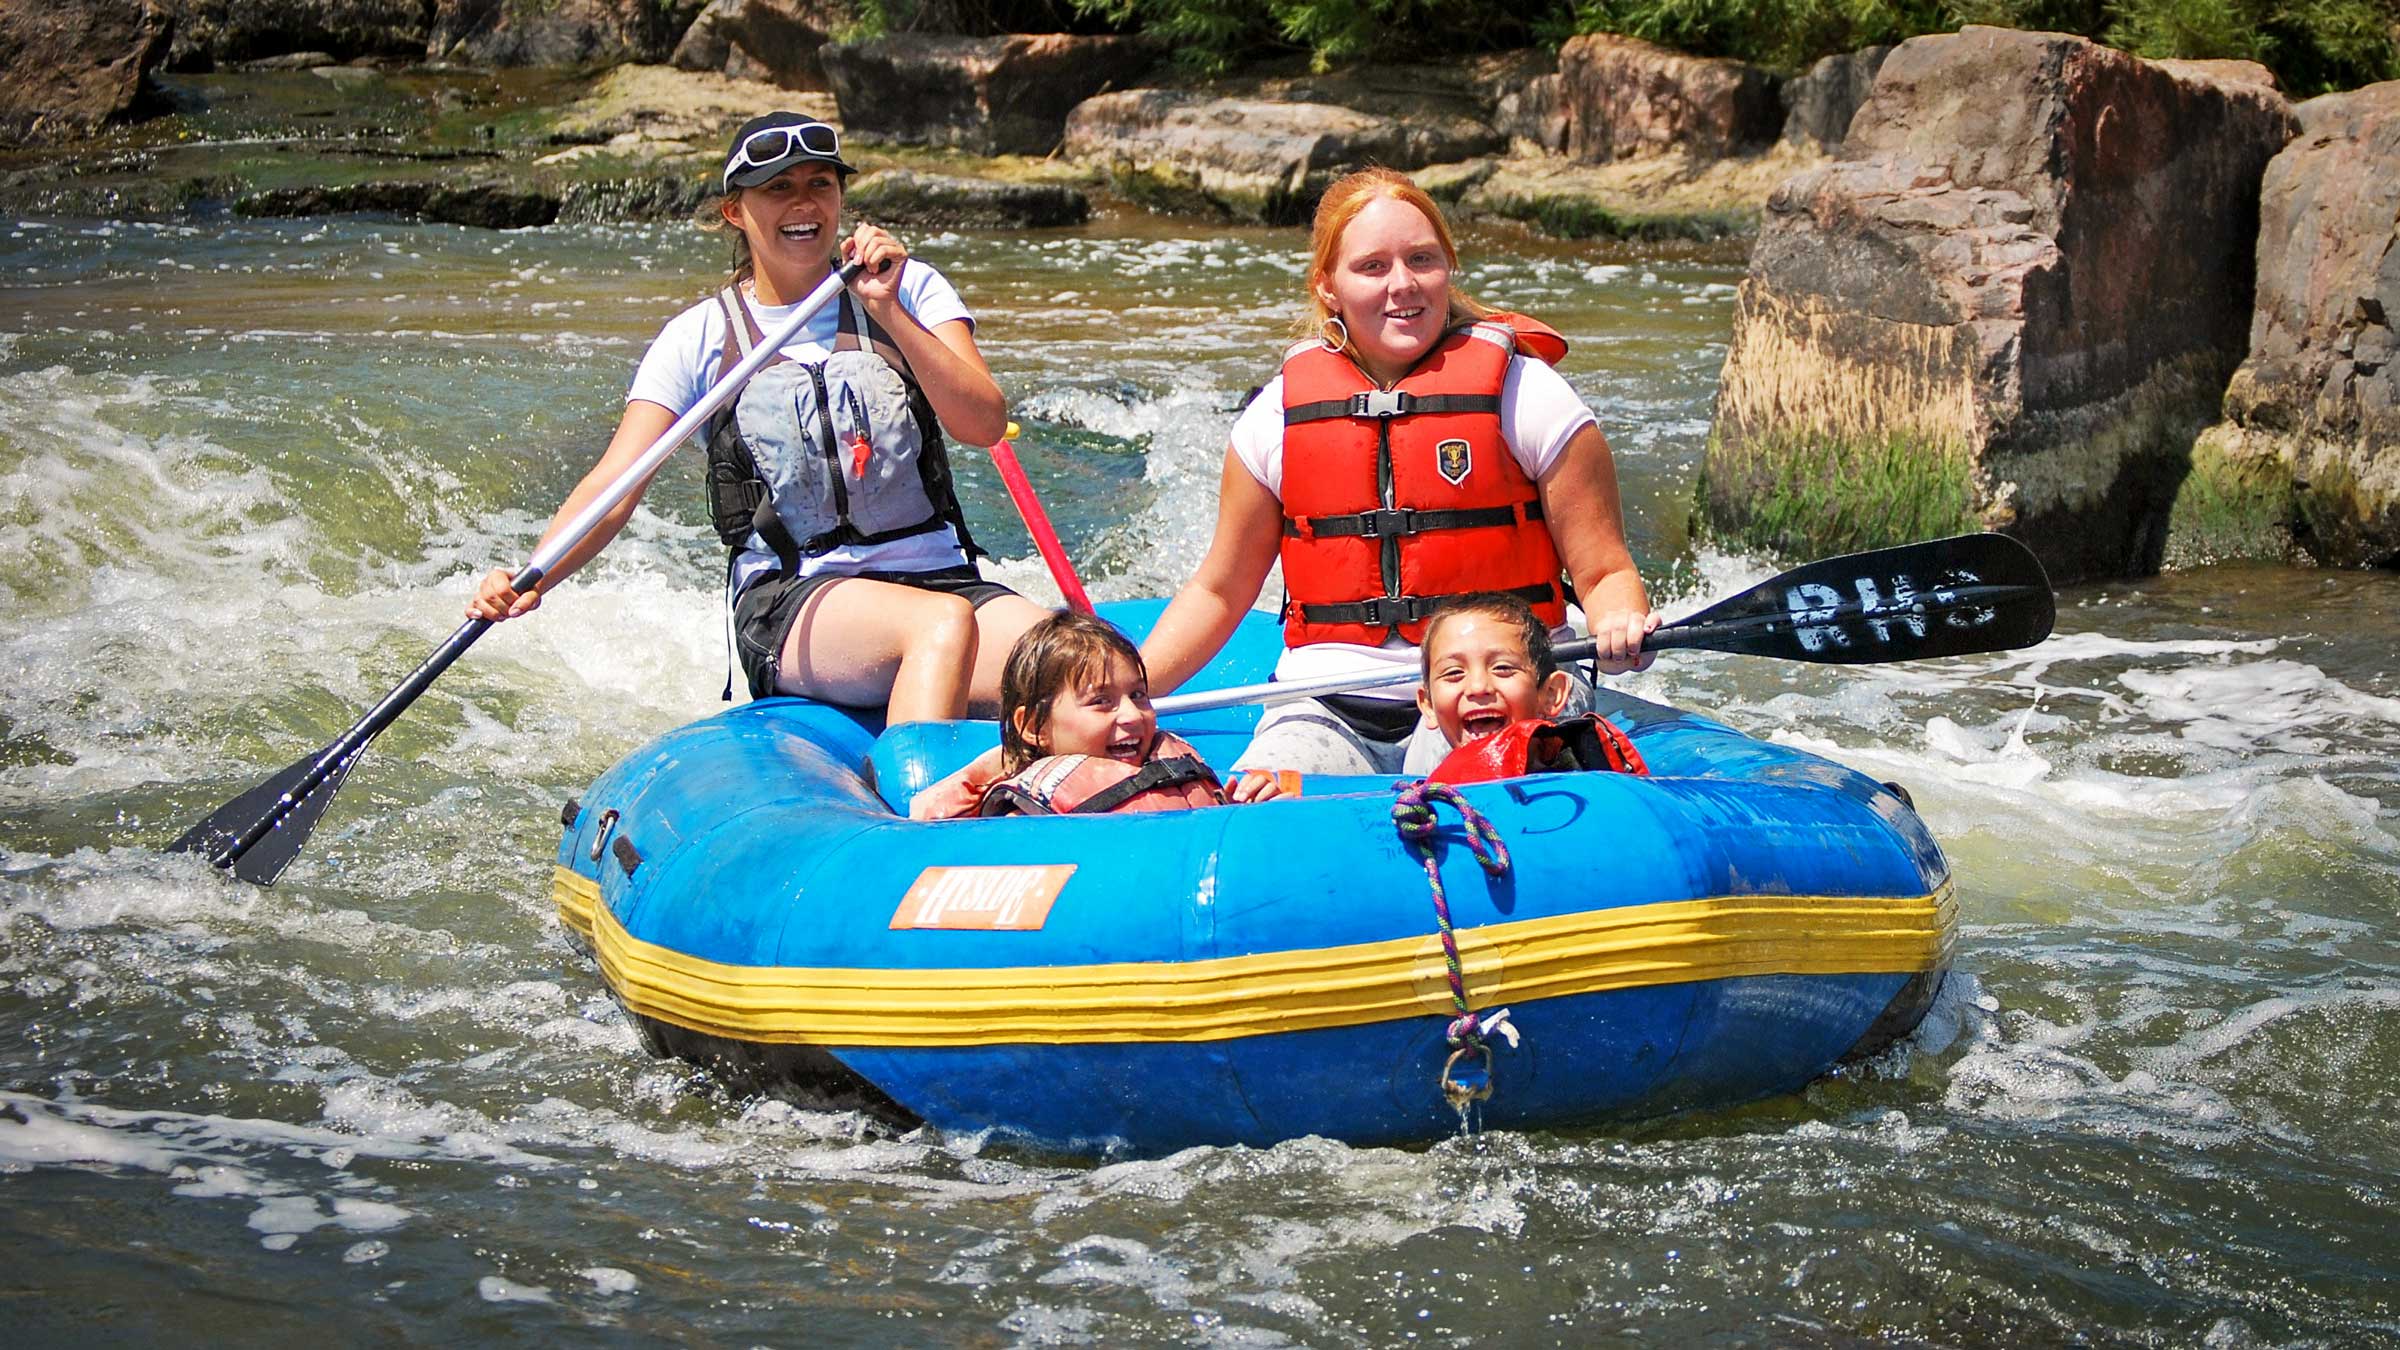 Rafting on South Platte River at The Greenway Foundation's Cross Currents Event